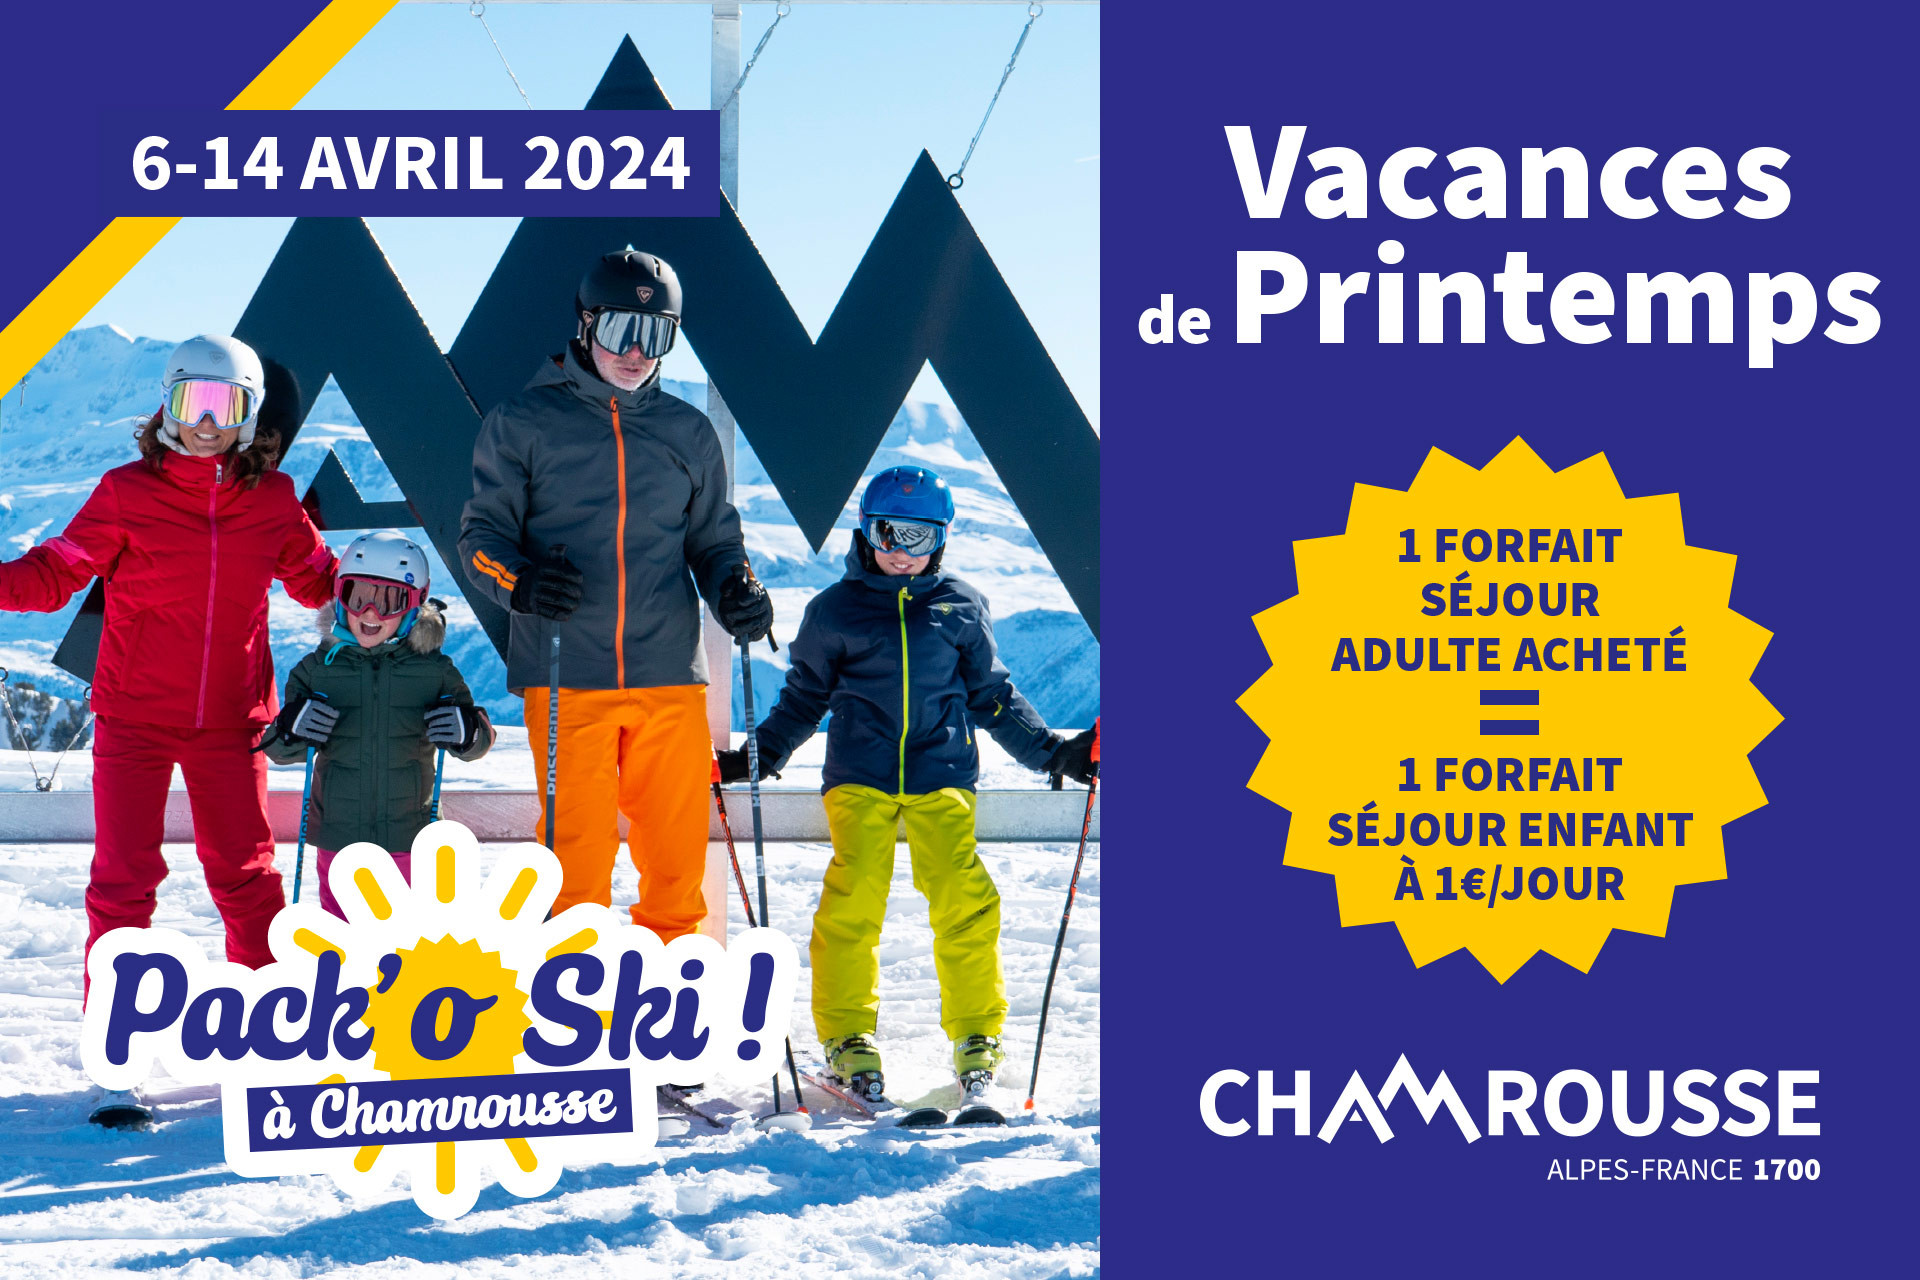 Pack'o ski - Spring family holidays offer in Chamrousse (formerly Skiing to Spring)